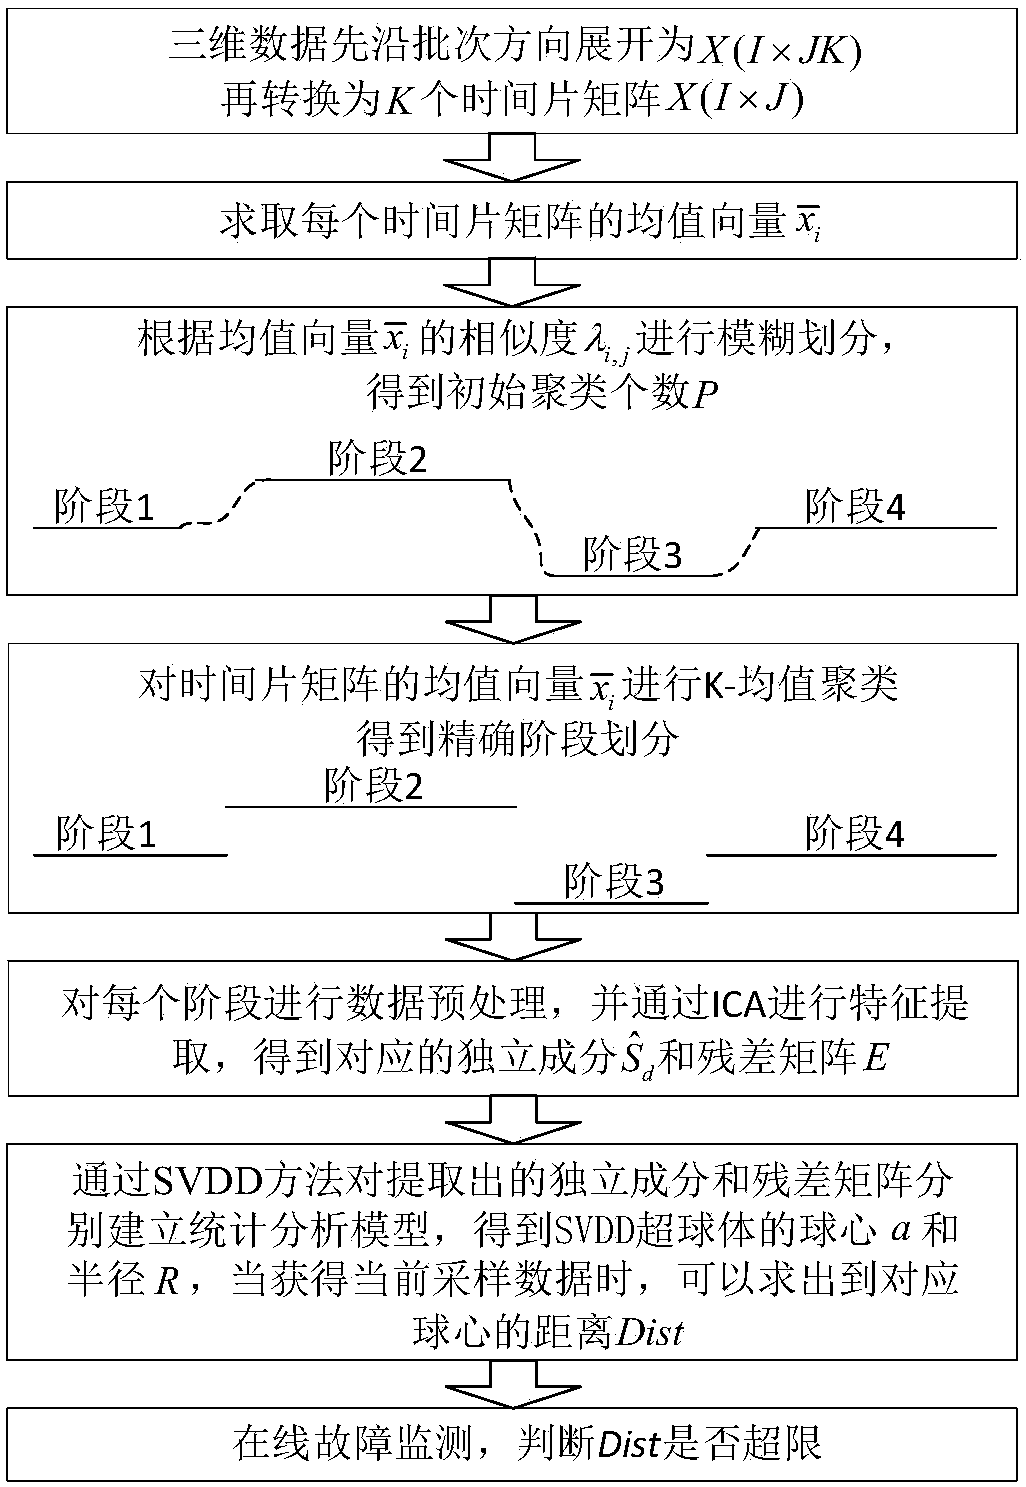 Batch process fault monitoring method based on multi-stage ICA-SVDD